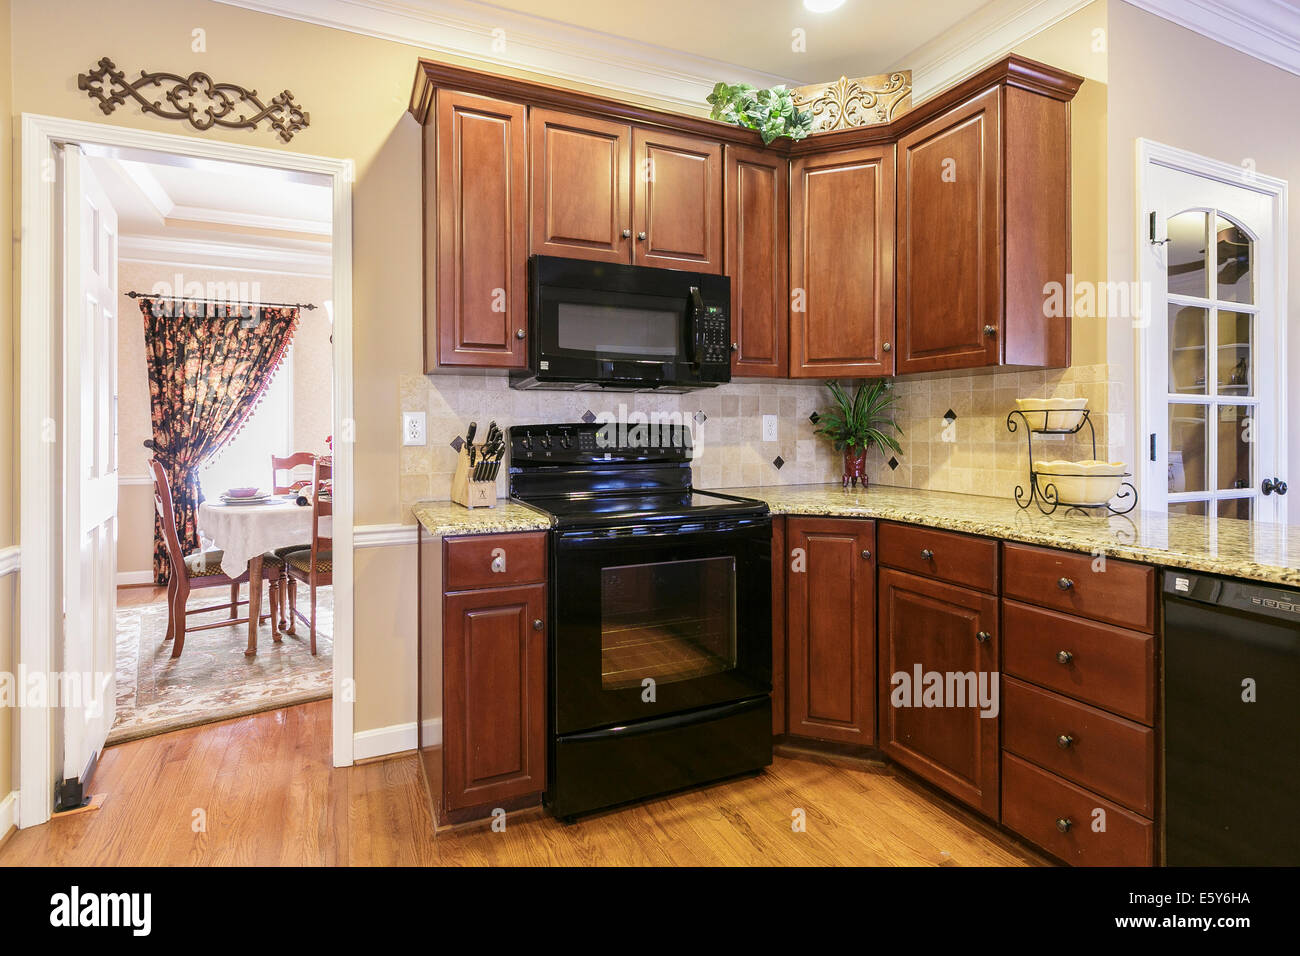 Custom kitchen in traditional home featuring hardwood floors and cabinets. Stock Photo